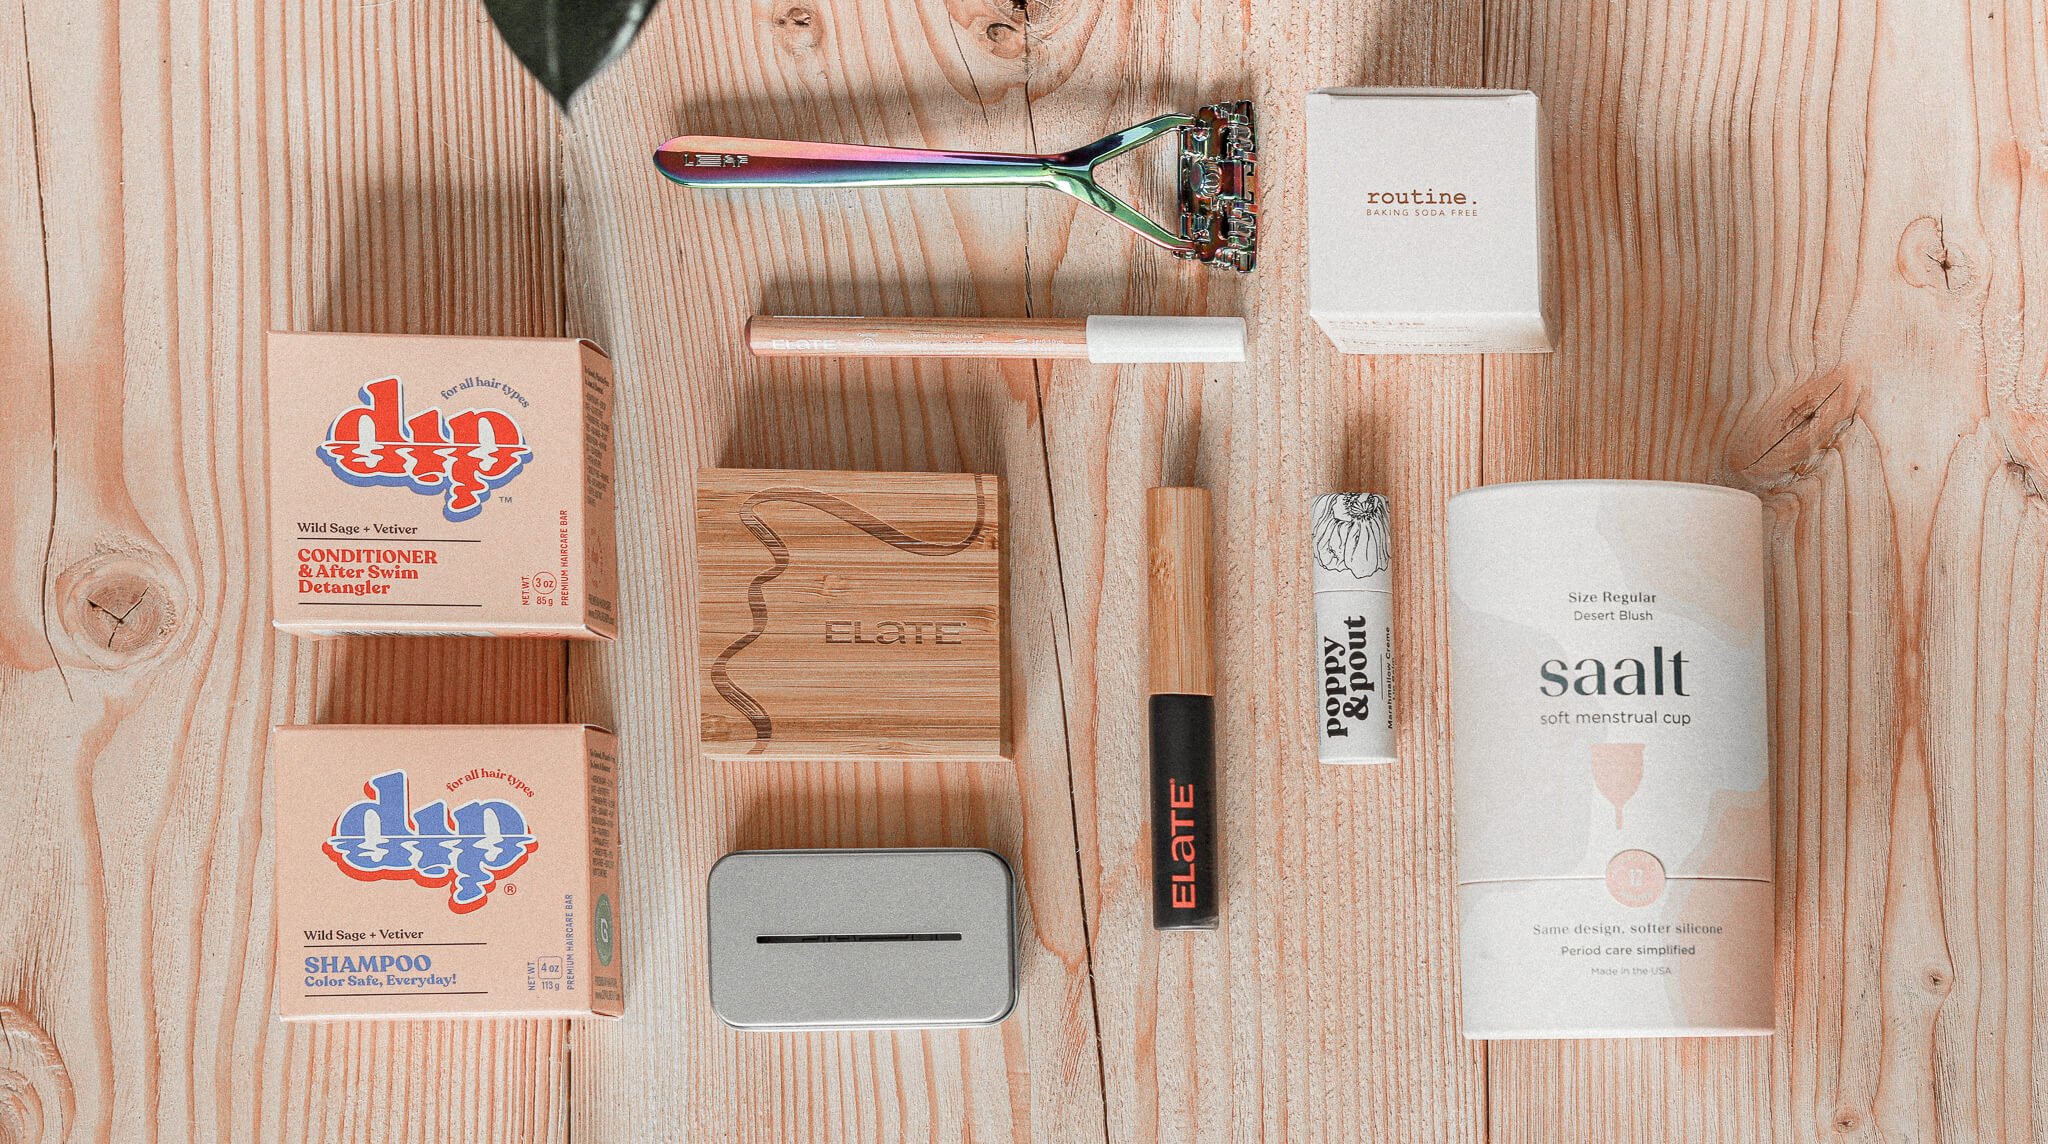 A collection of toxin-free, zero-waste products from fulFILLed Lifestyle Co.